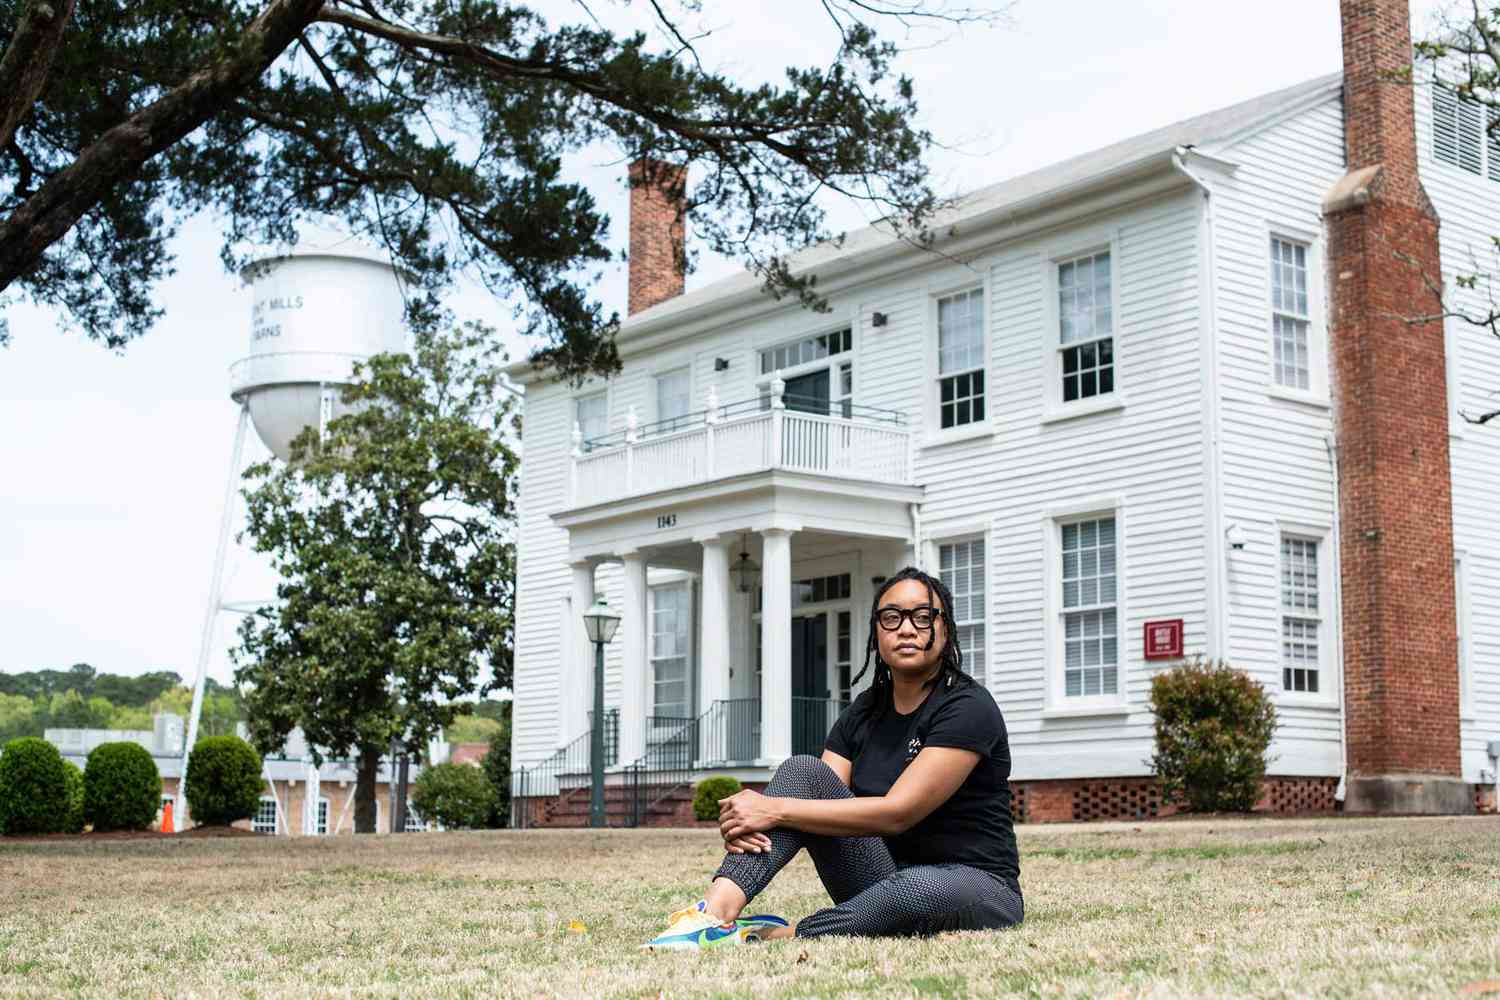  Meet the Women of Color Remaking One North Carolina Town Into a Destination That Celebrates Diversity 